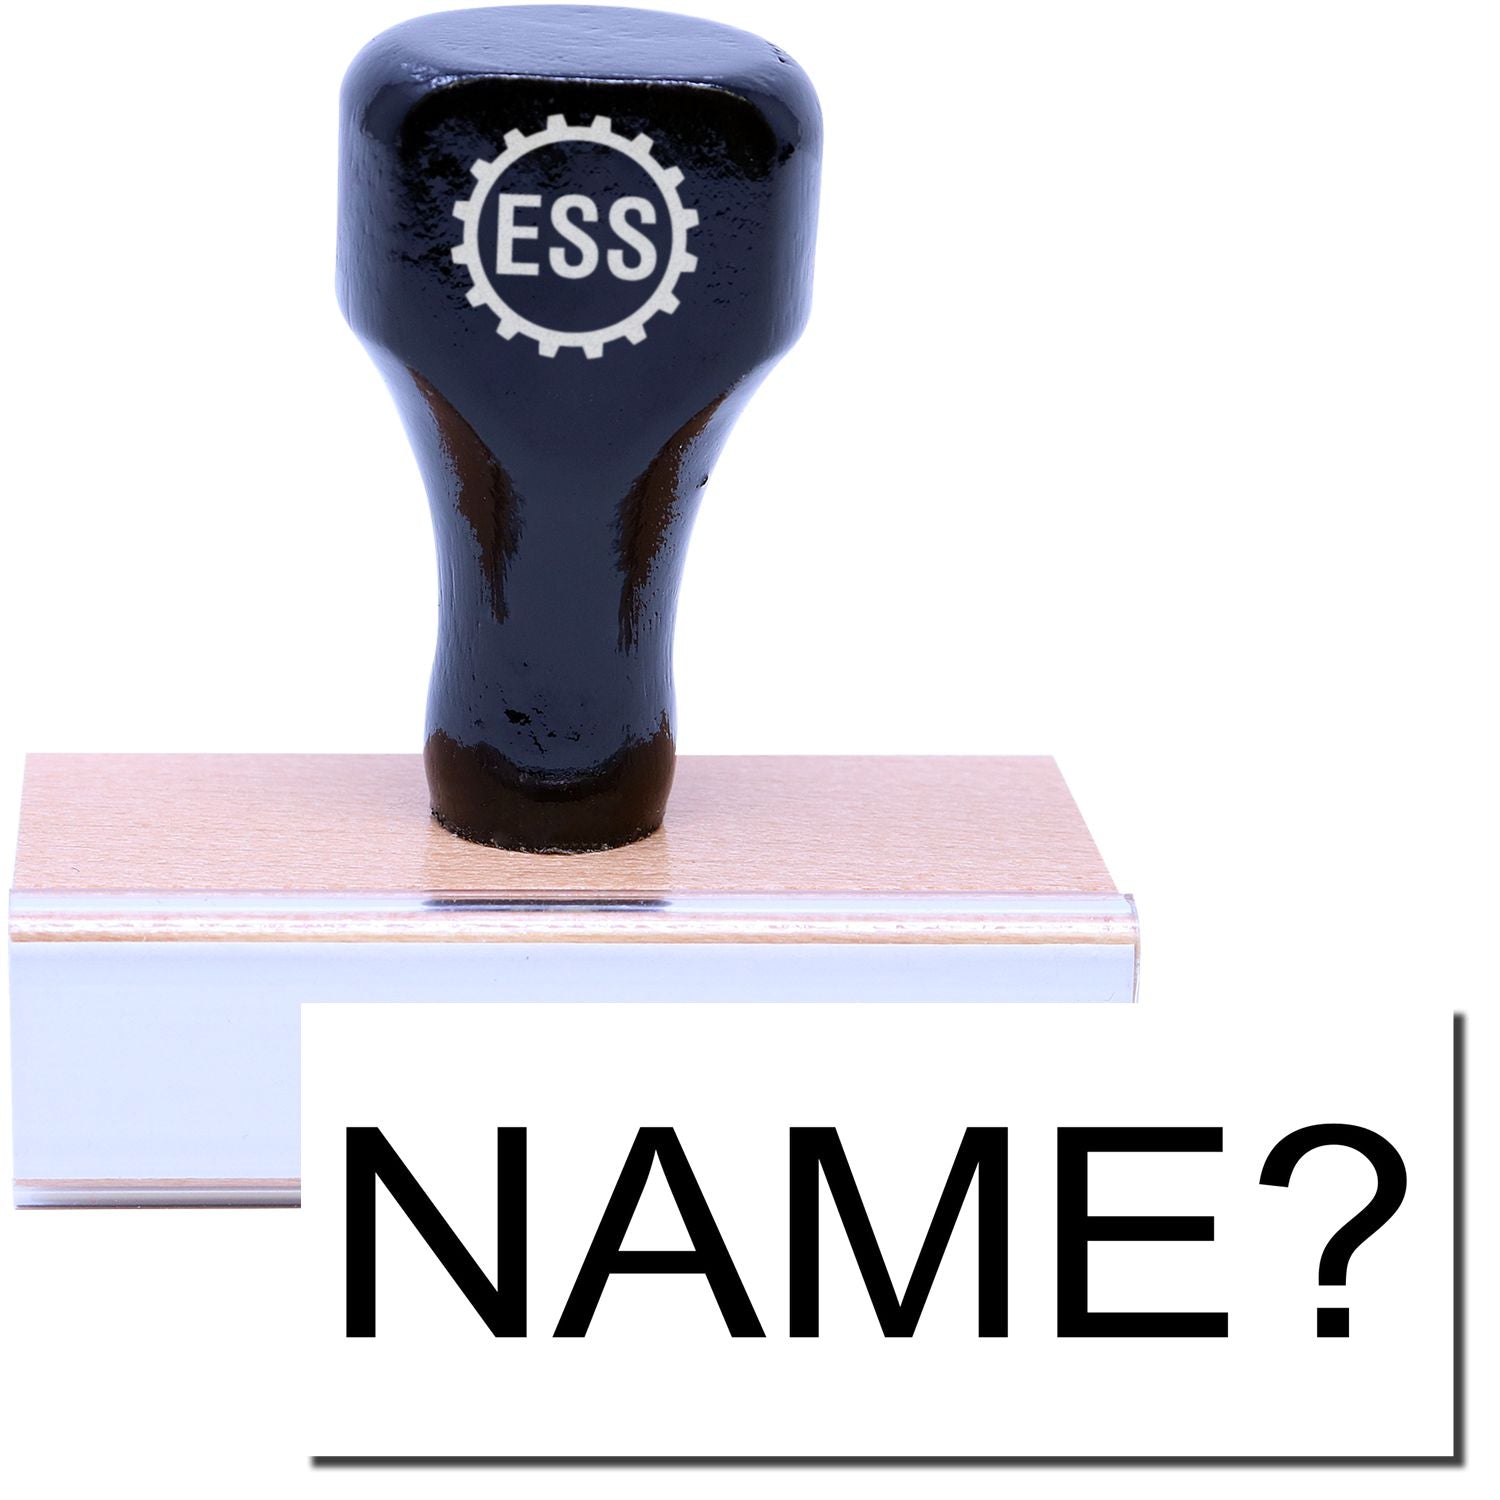 A stock office rubber stamp with a stamped image showing how the text "NAME?" is displayed after stamping.